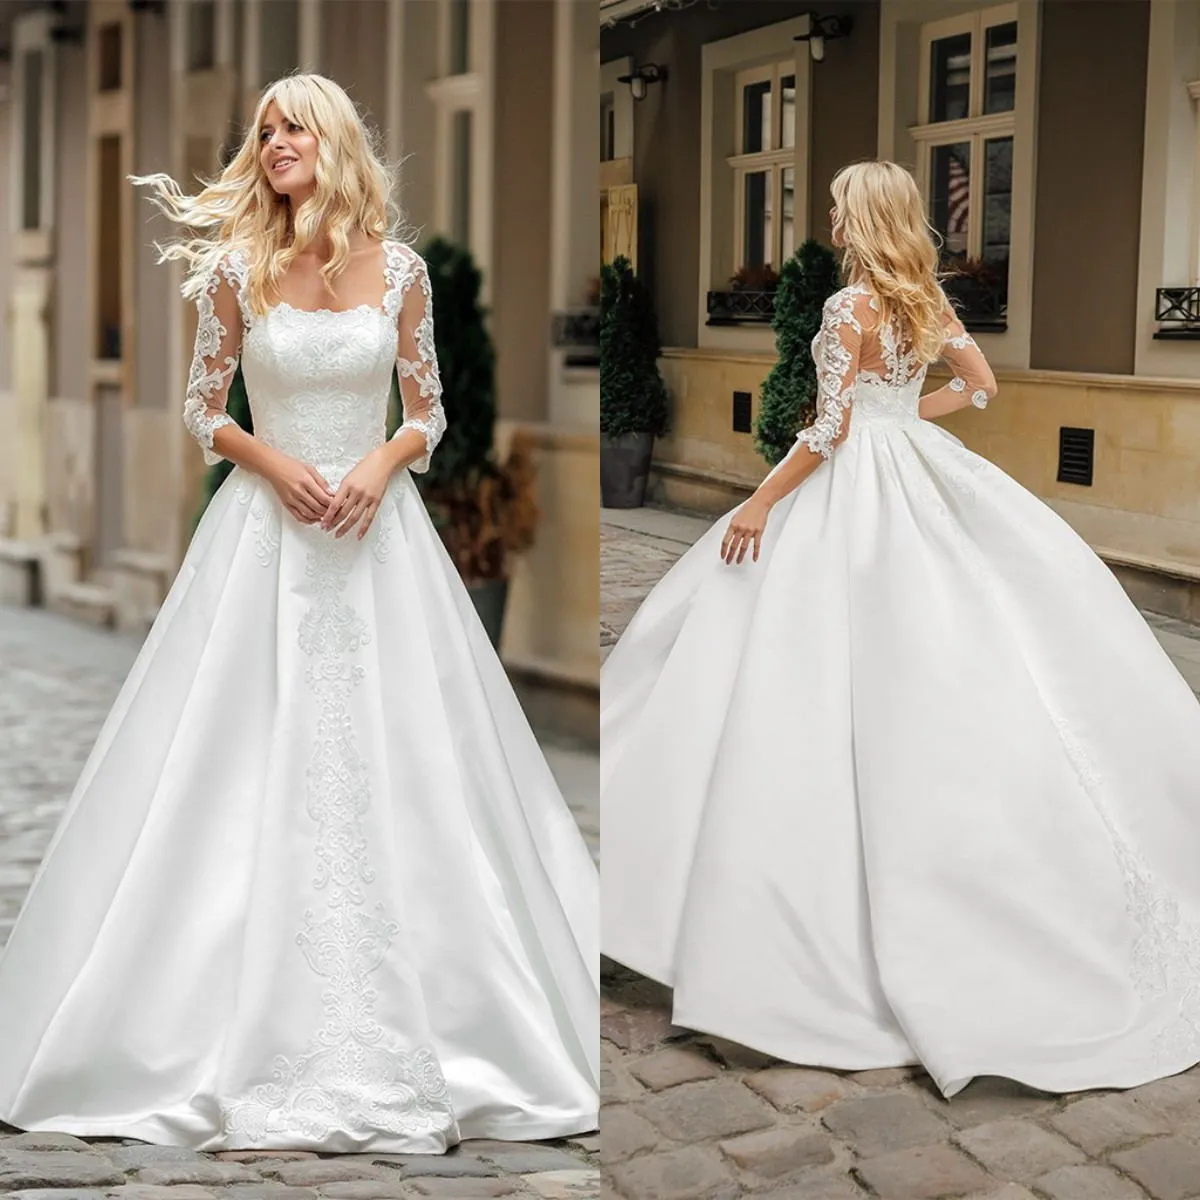 Custom Made 2021 A Line Wedding Dress With Square Neck, Long Sleeves, Lace  And Satin Fabric, Button Back, And Sweep Train From Newdeve, $128.15